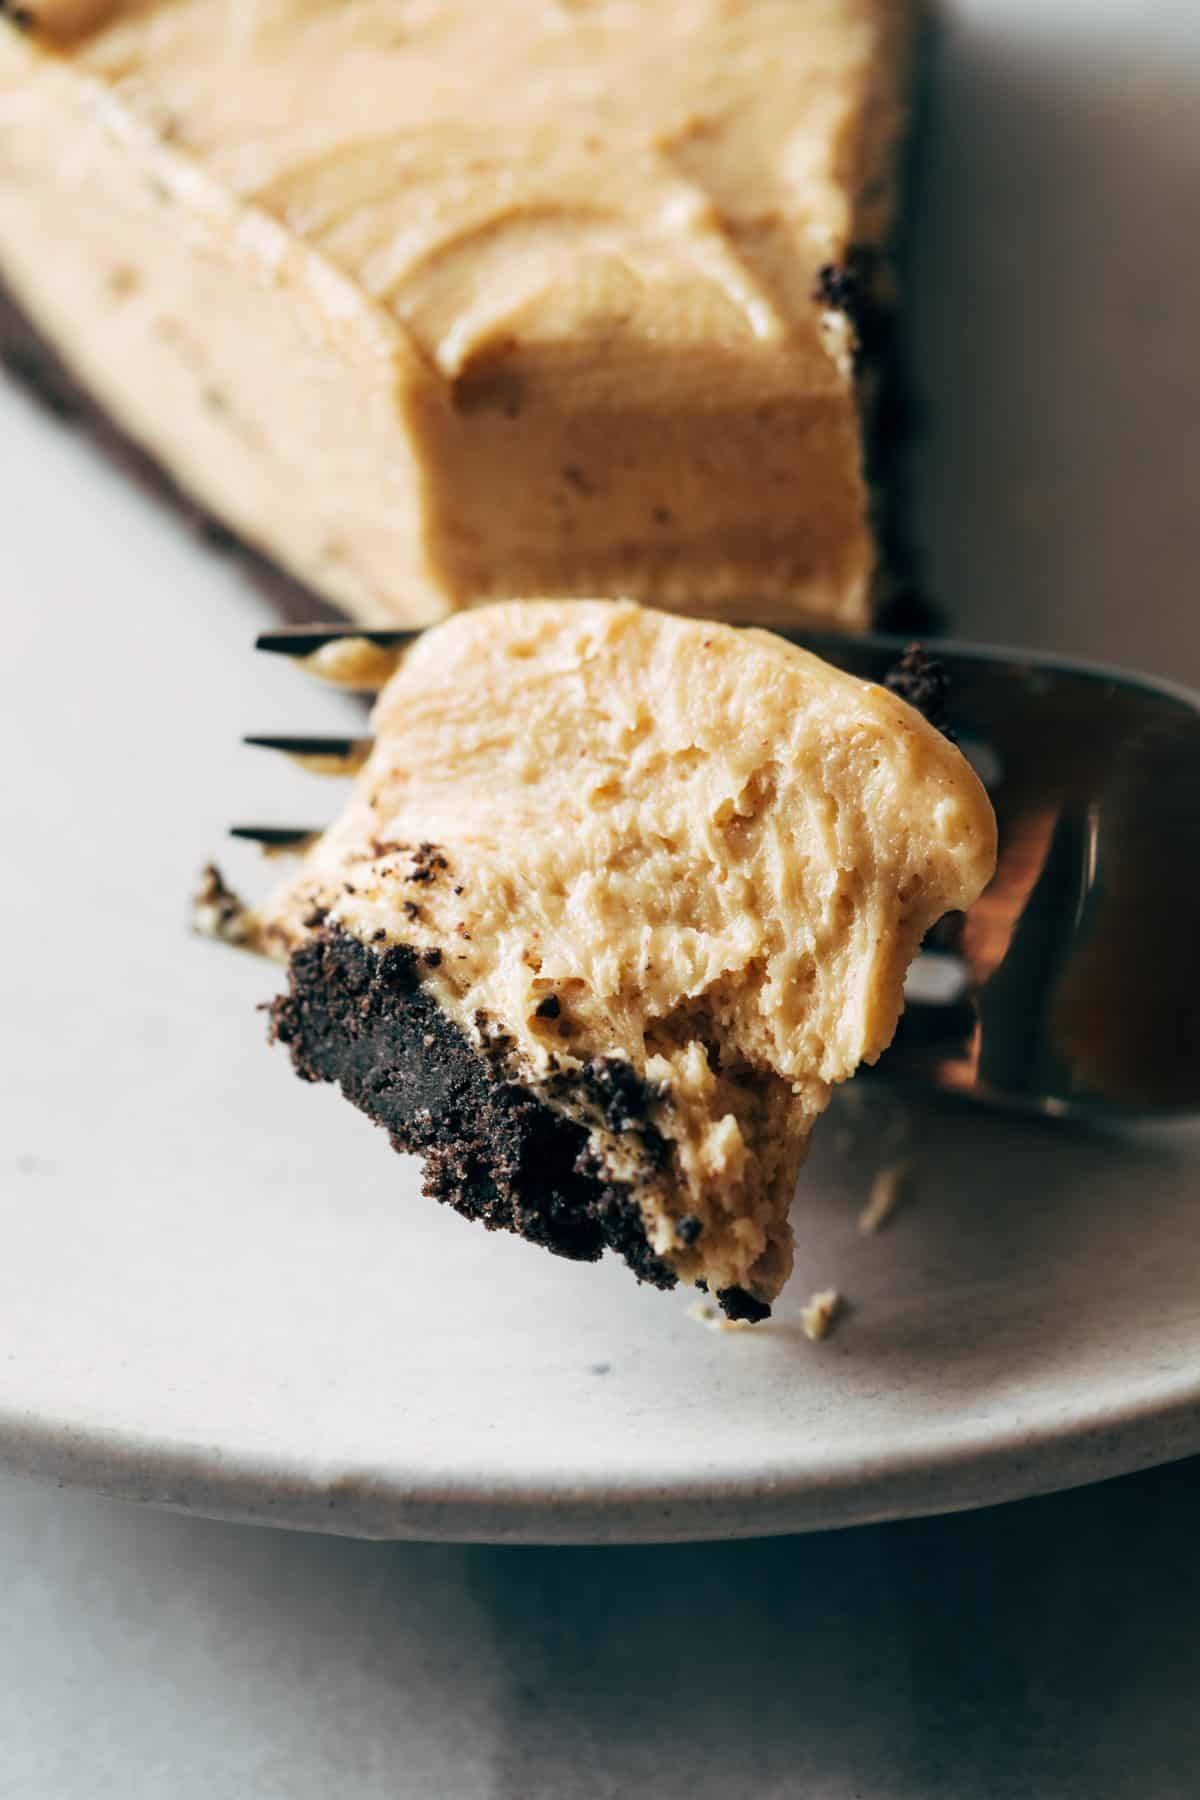 Taking a bite of peanut butter pie with fork.